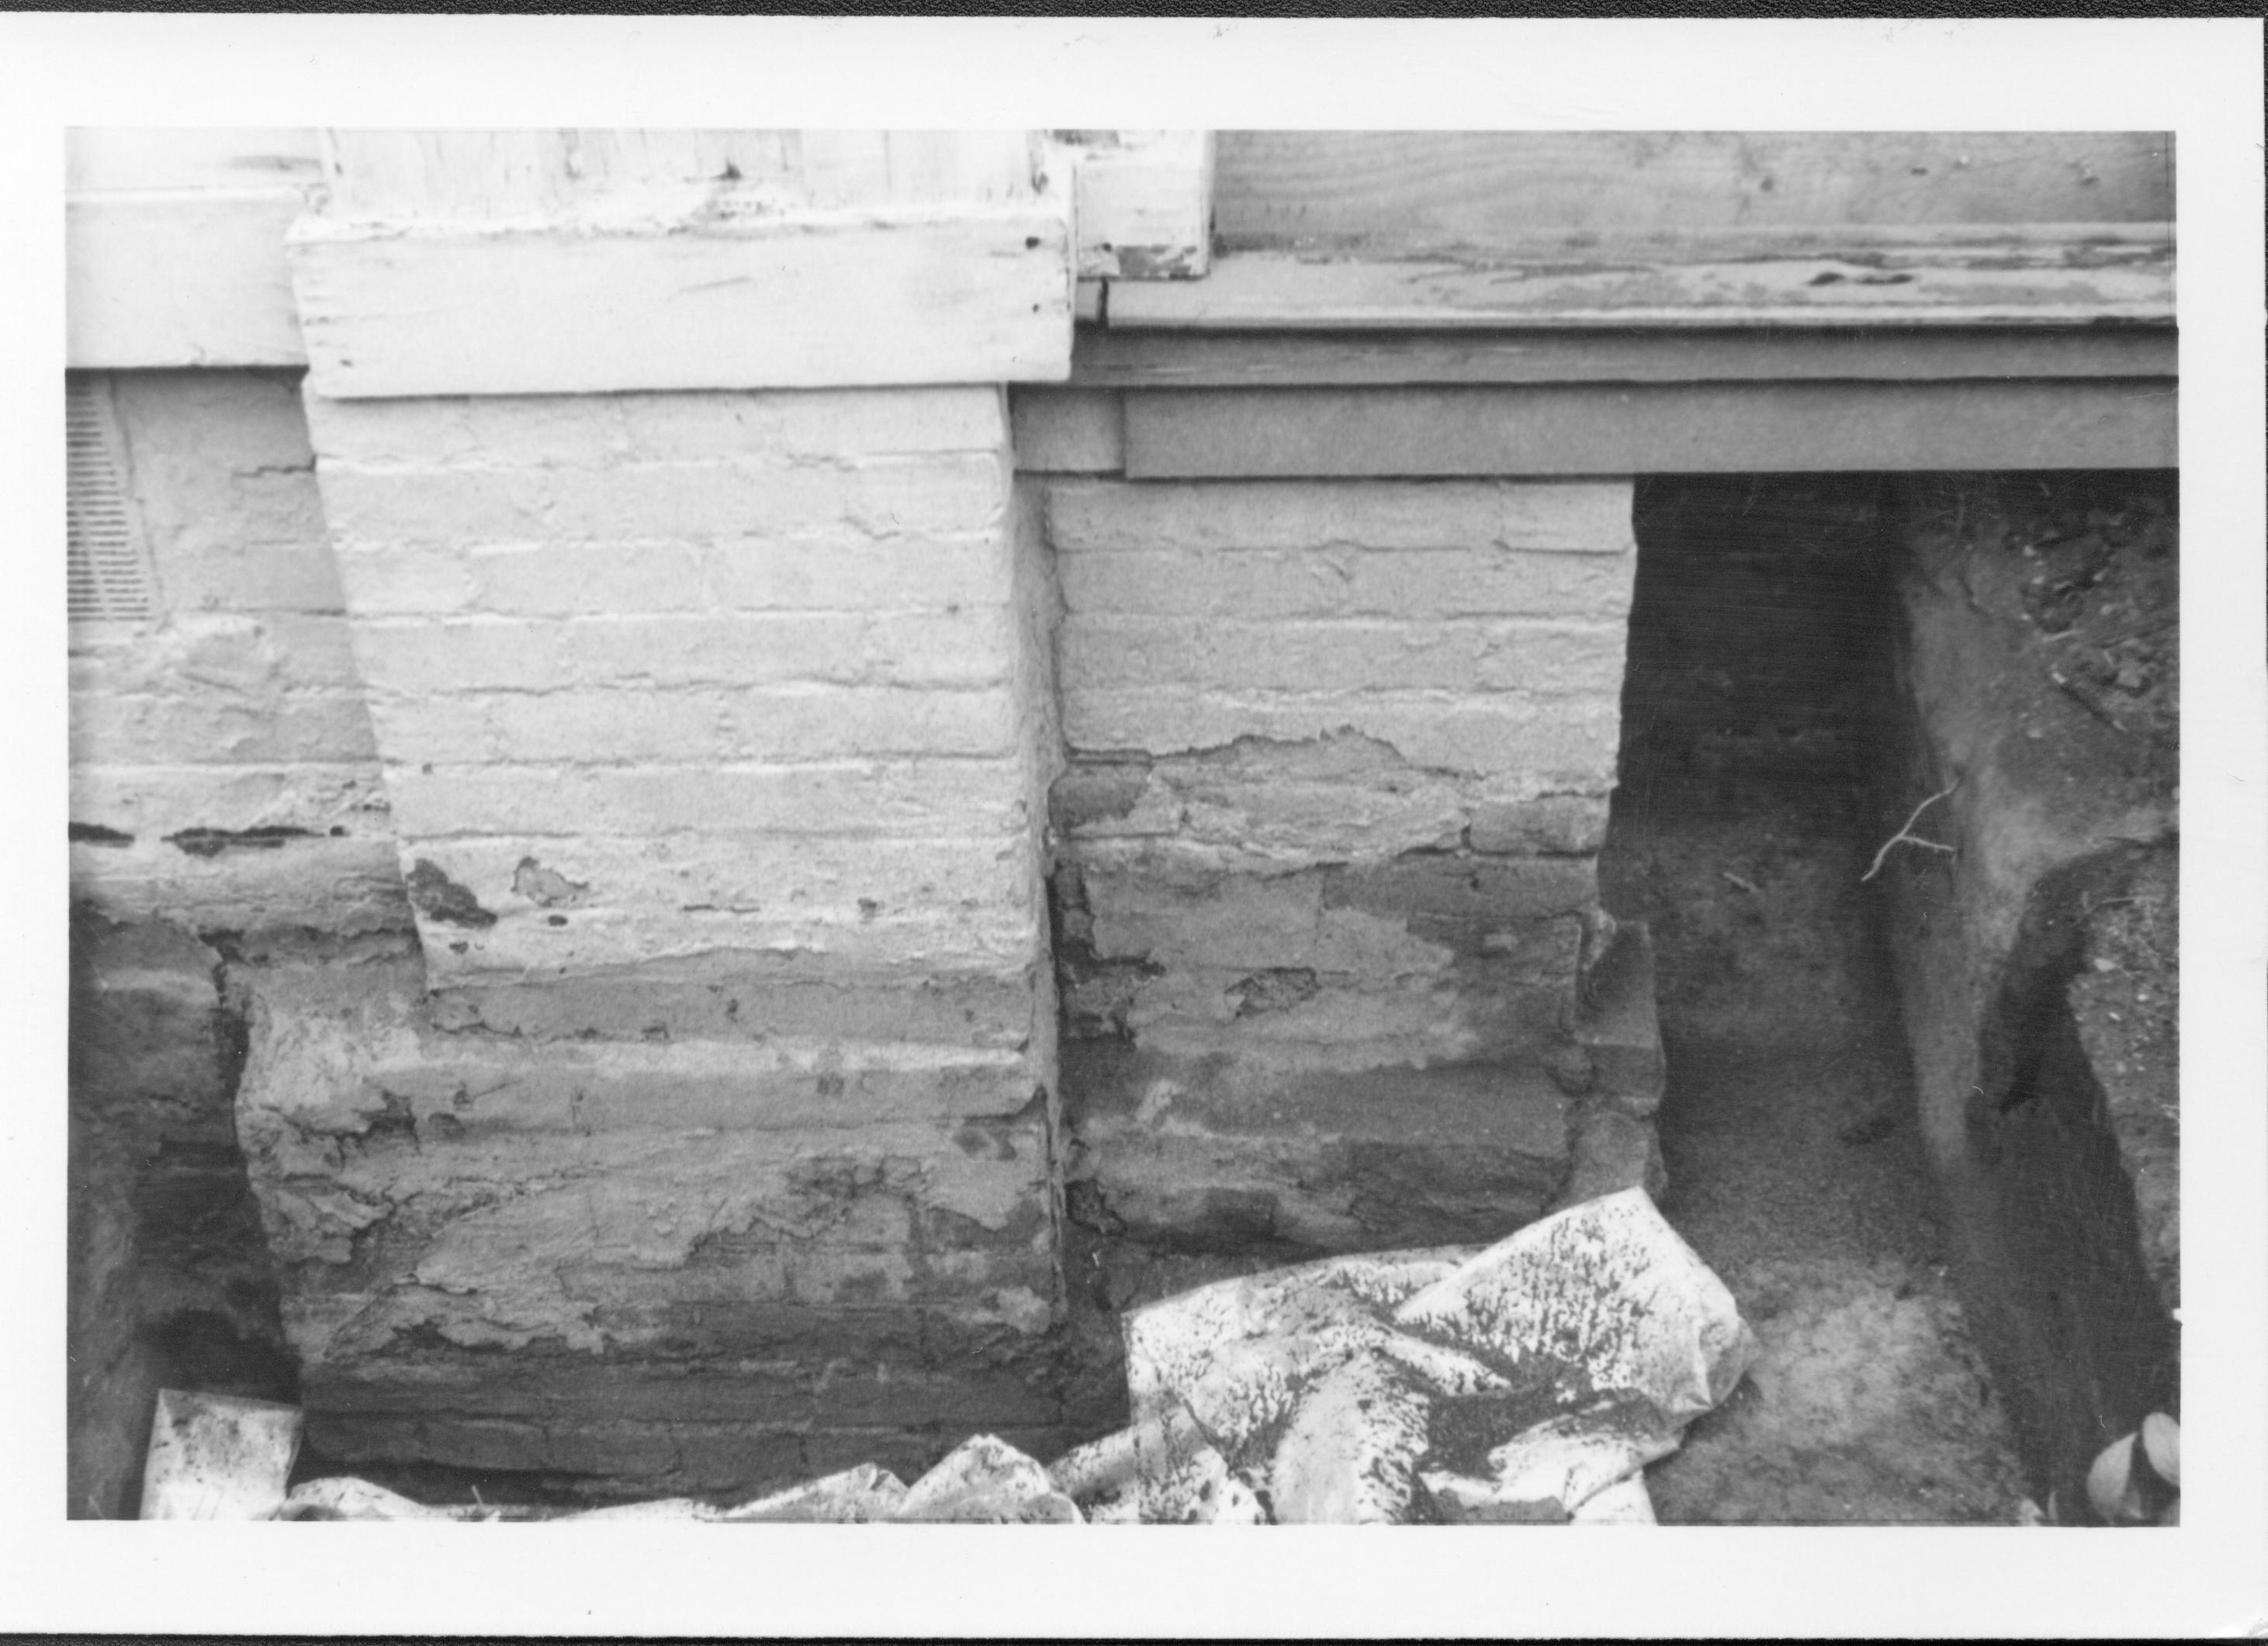 Foundation of Lincoln Home, near junction of south east pillar and south porch, during the 187-88 restoration. Photographer facing north. Basement/crawl space vent can be seen on the left side of the photo.